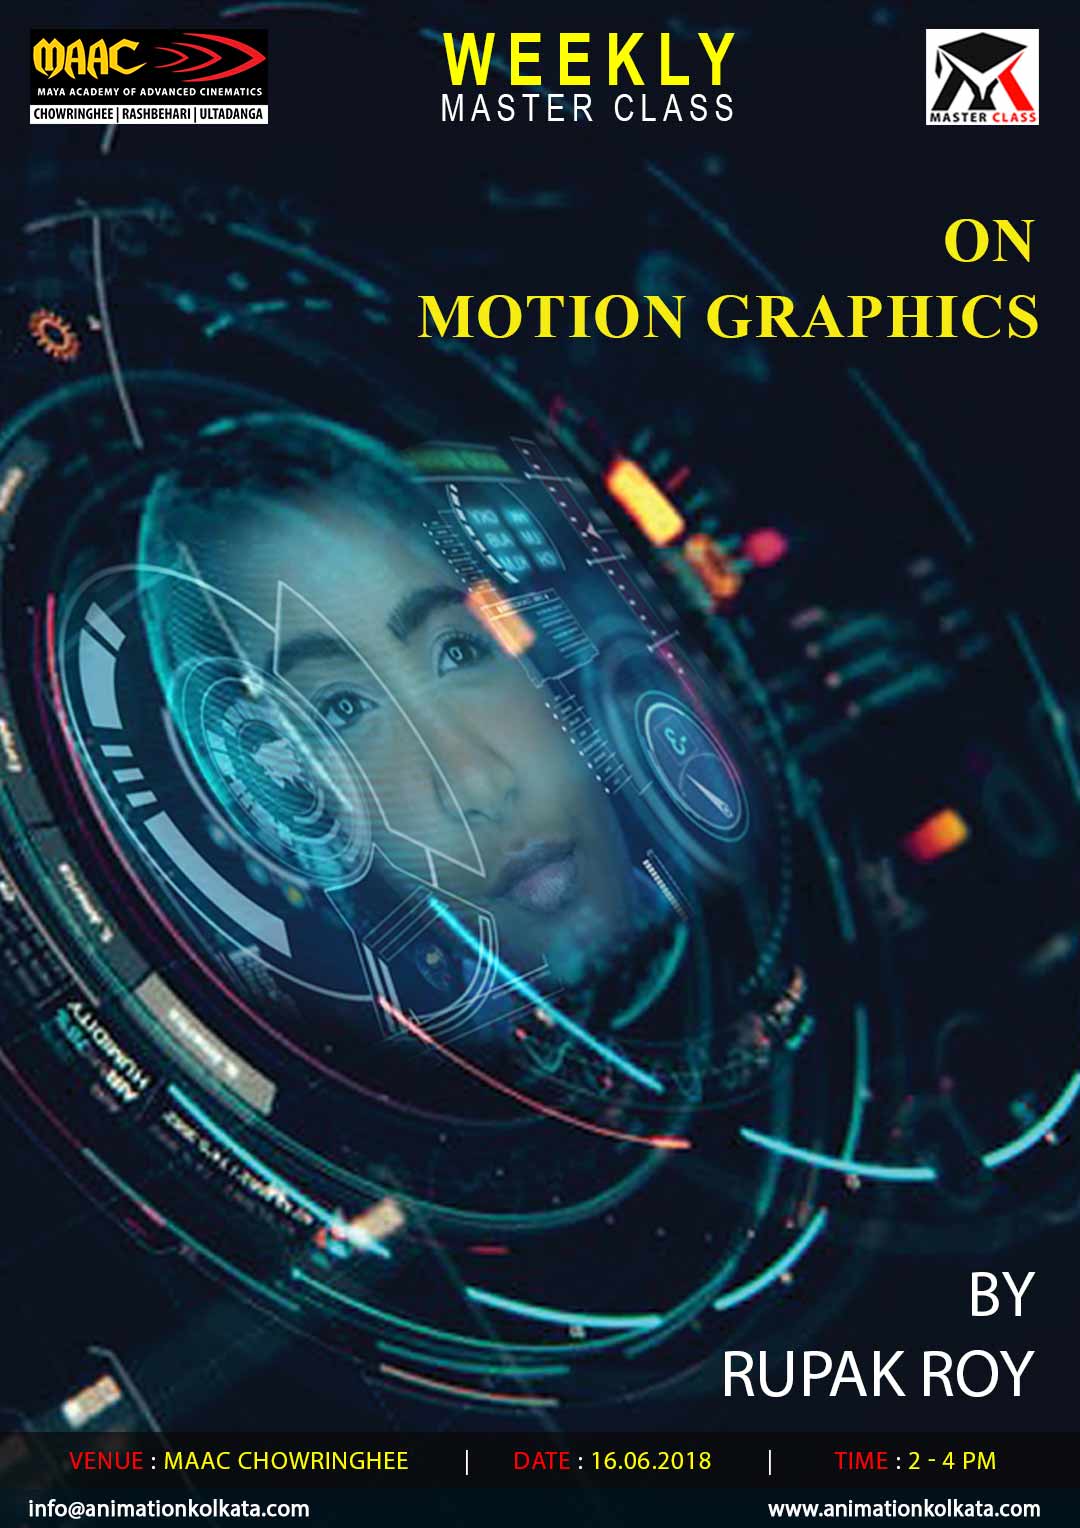 Weekly Master Class on Motion Graphics